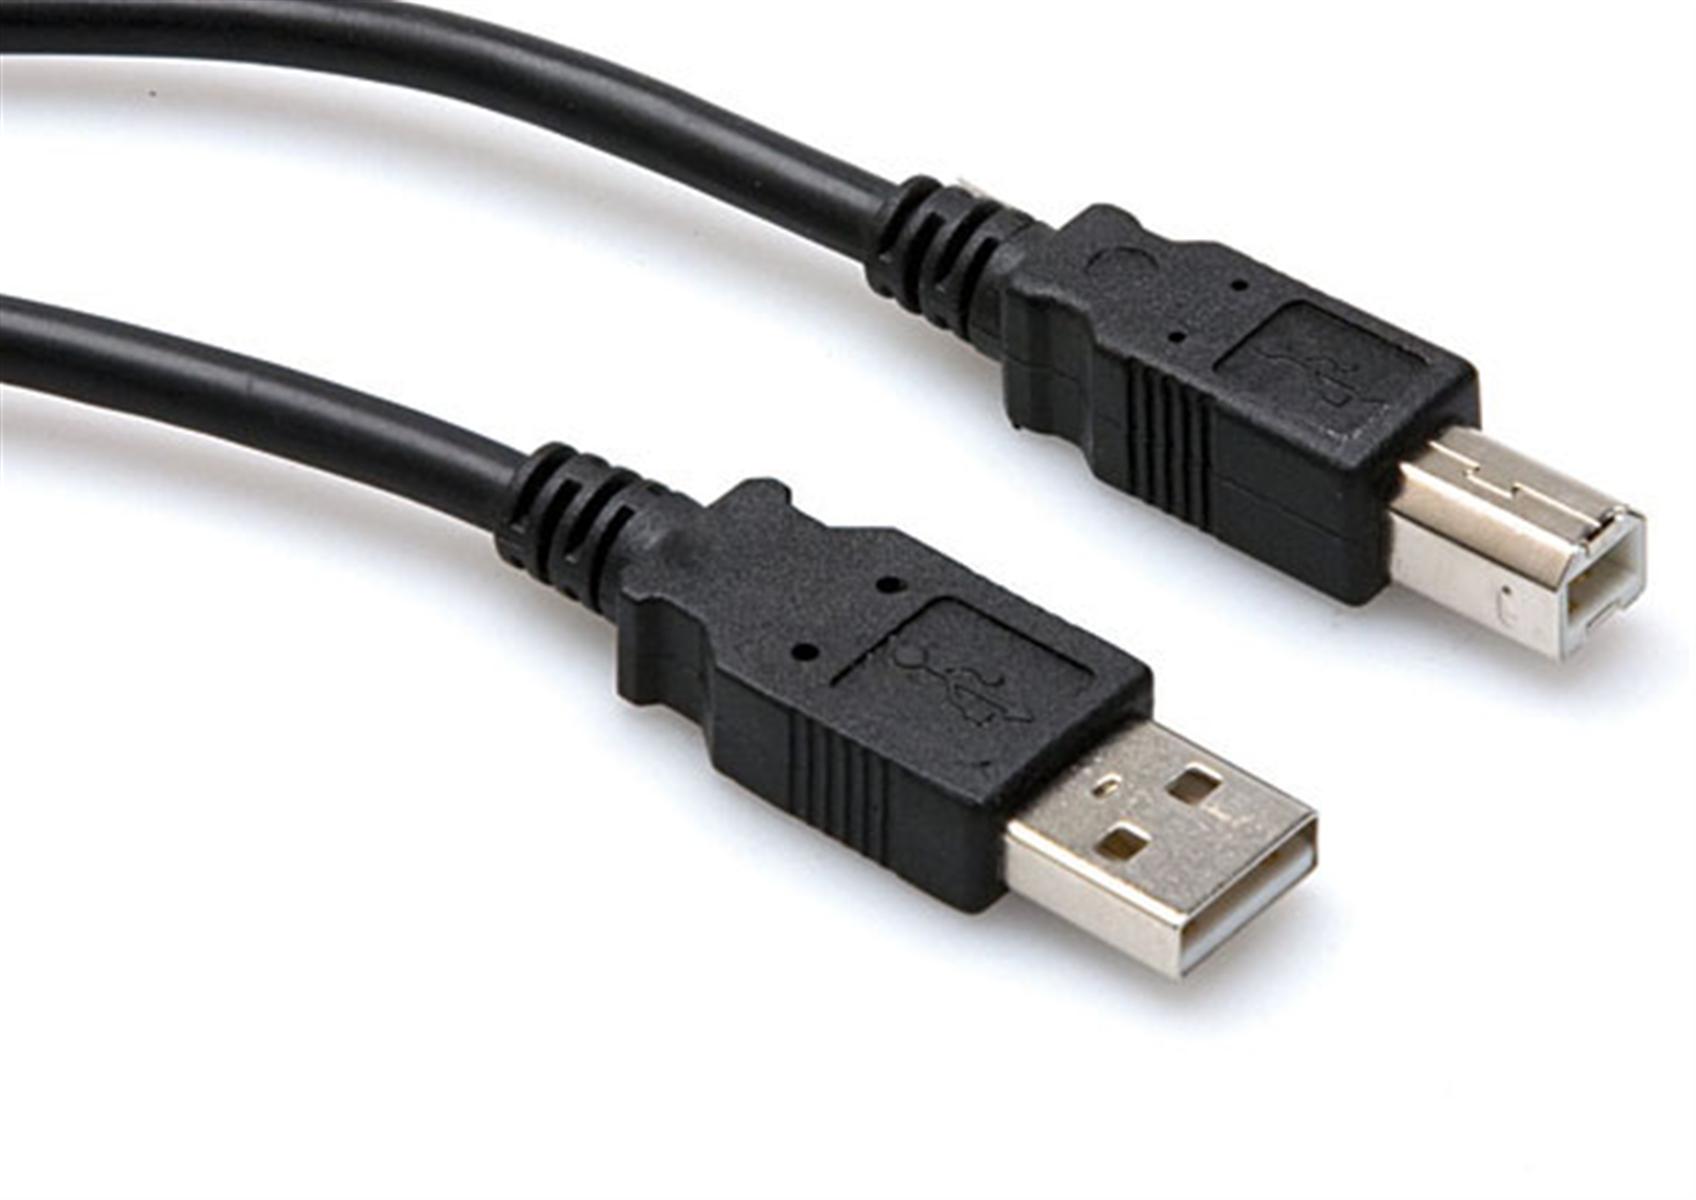 Hosa USB-210AB Hi-Speed USB 2.0 Cable, 10ft and more Digital Cables ...